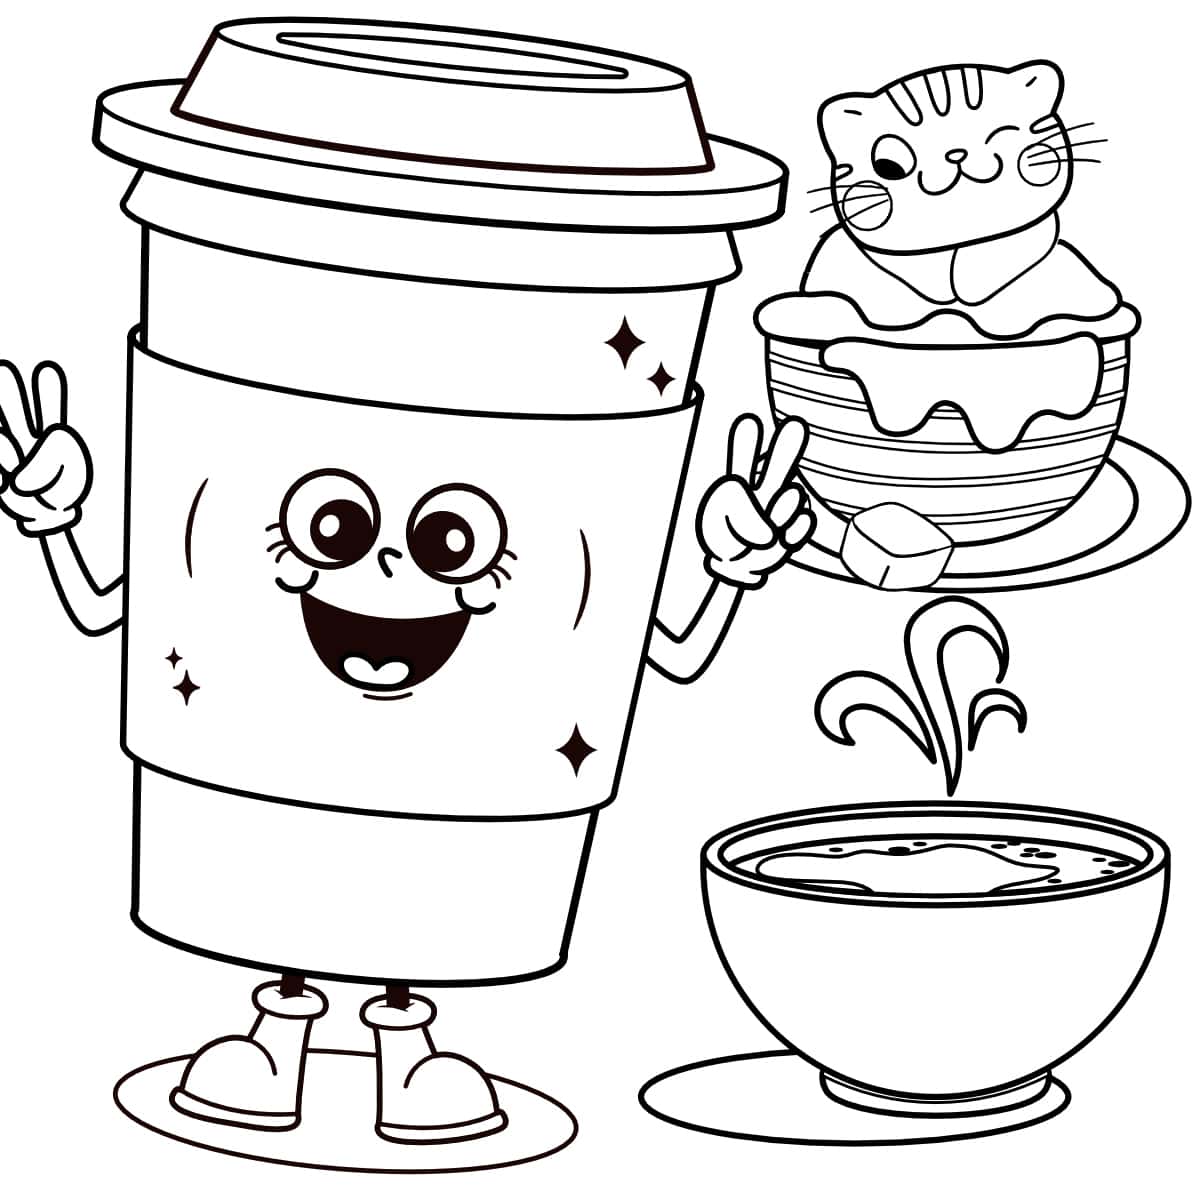 3 different coffee cup drawings of line art for kids to color.